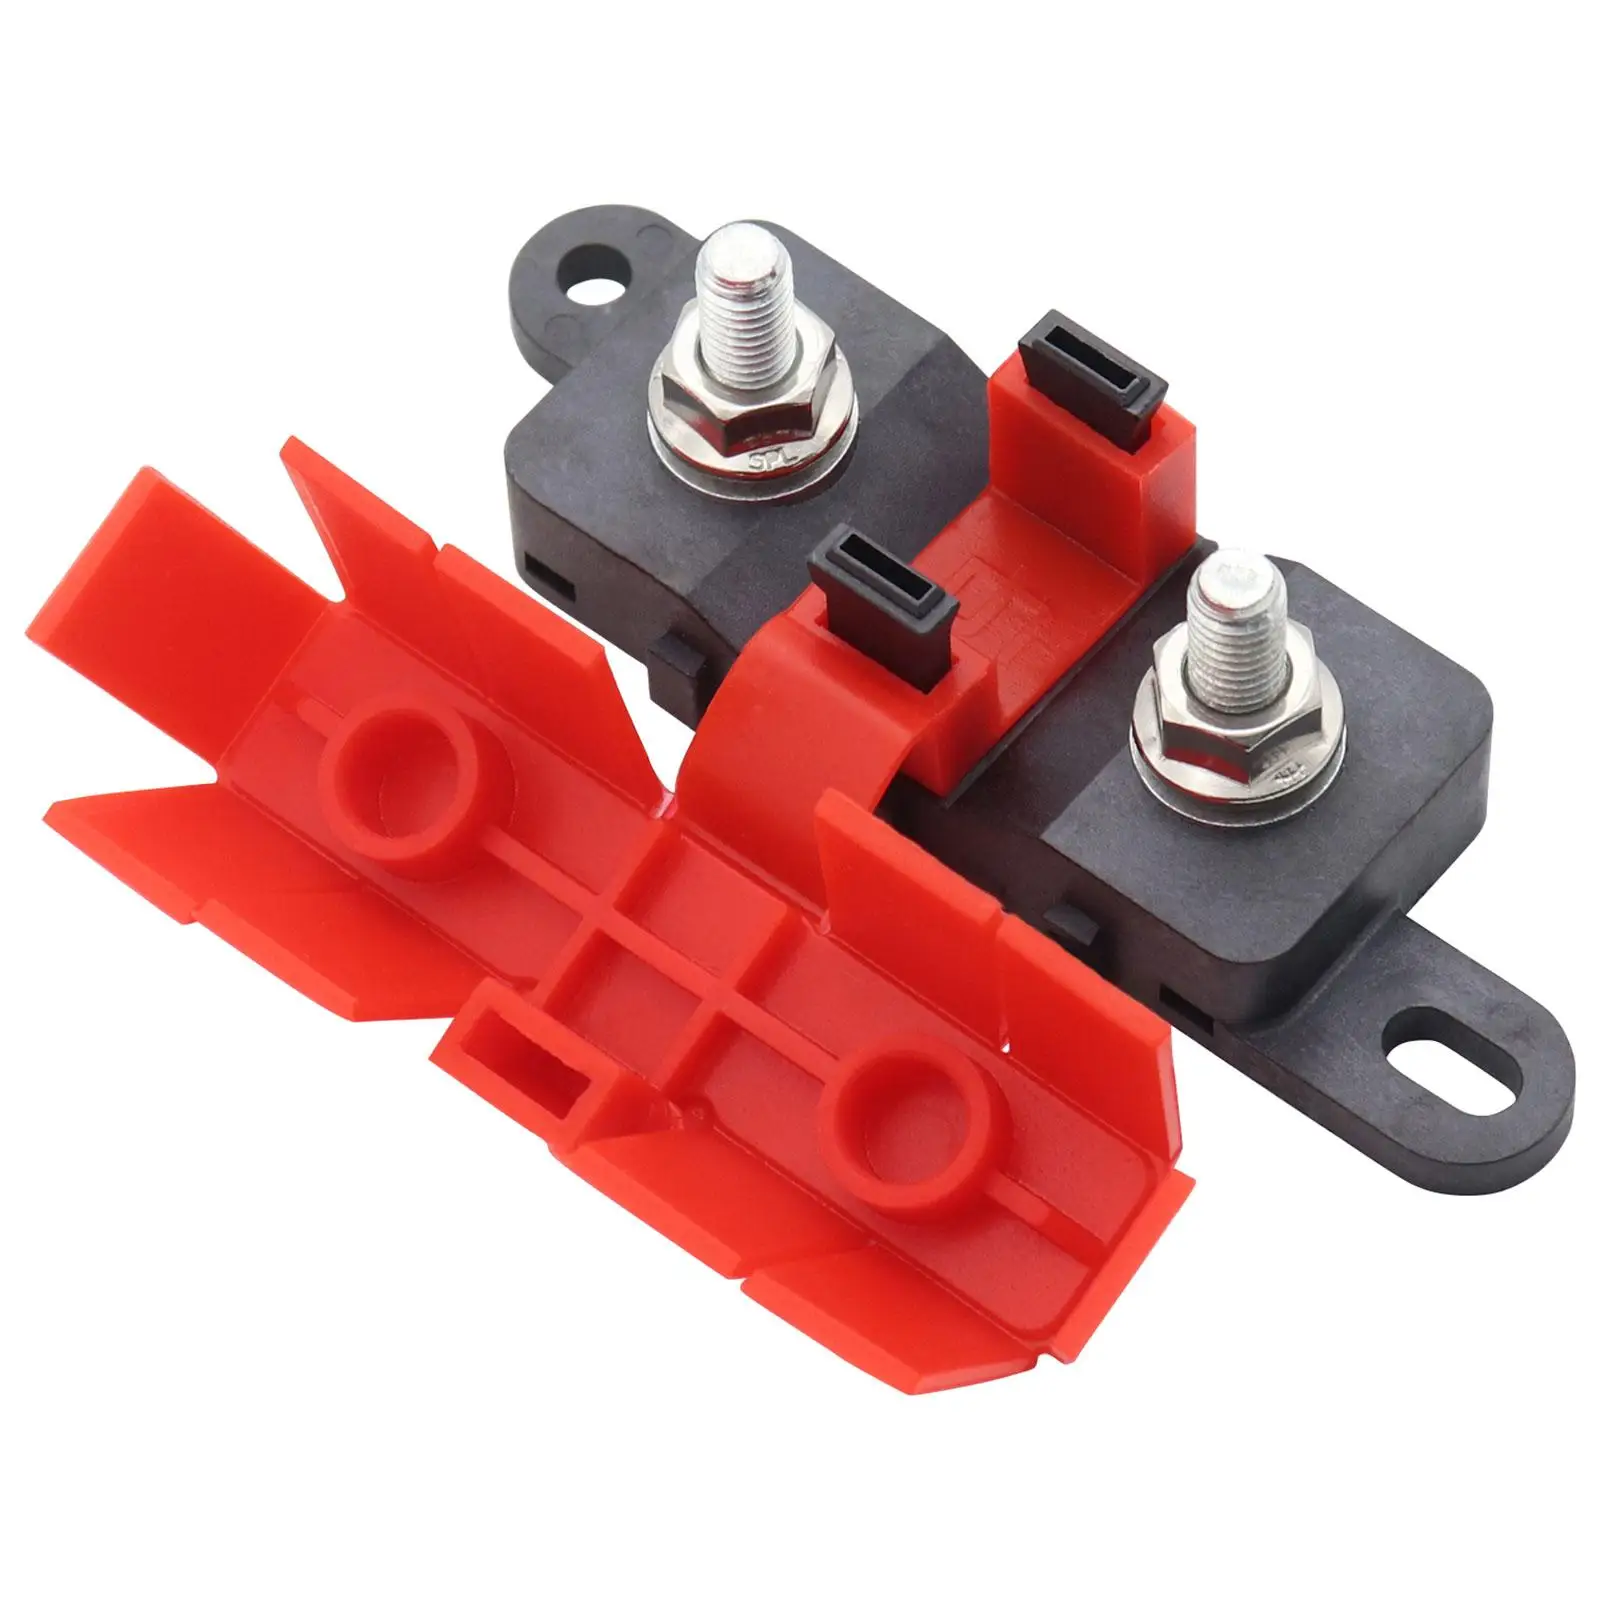 Auto Fuses Holder Accessories with Red Cover 500A 70V DC Fuse Box Screw Down Fuse for Motorhome Car Marine Boat Yacht RV